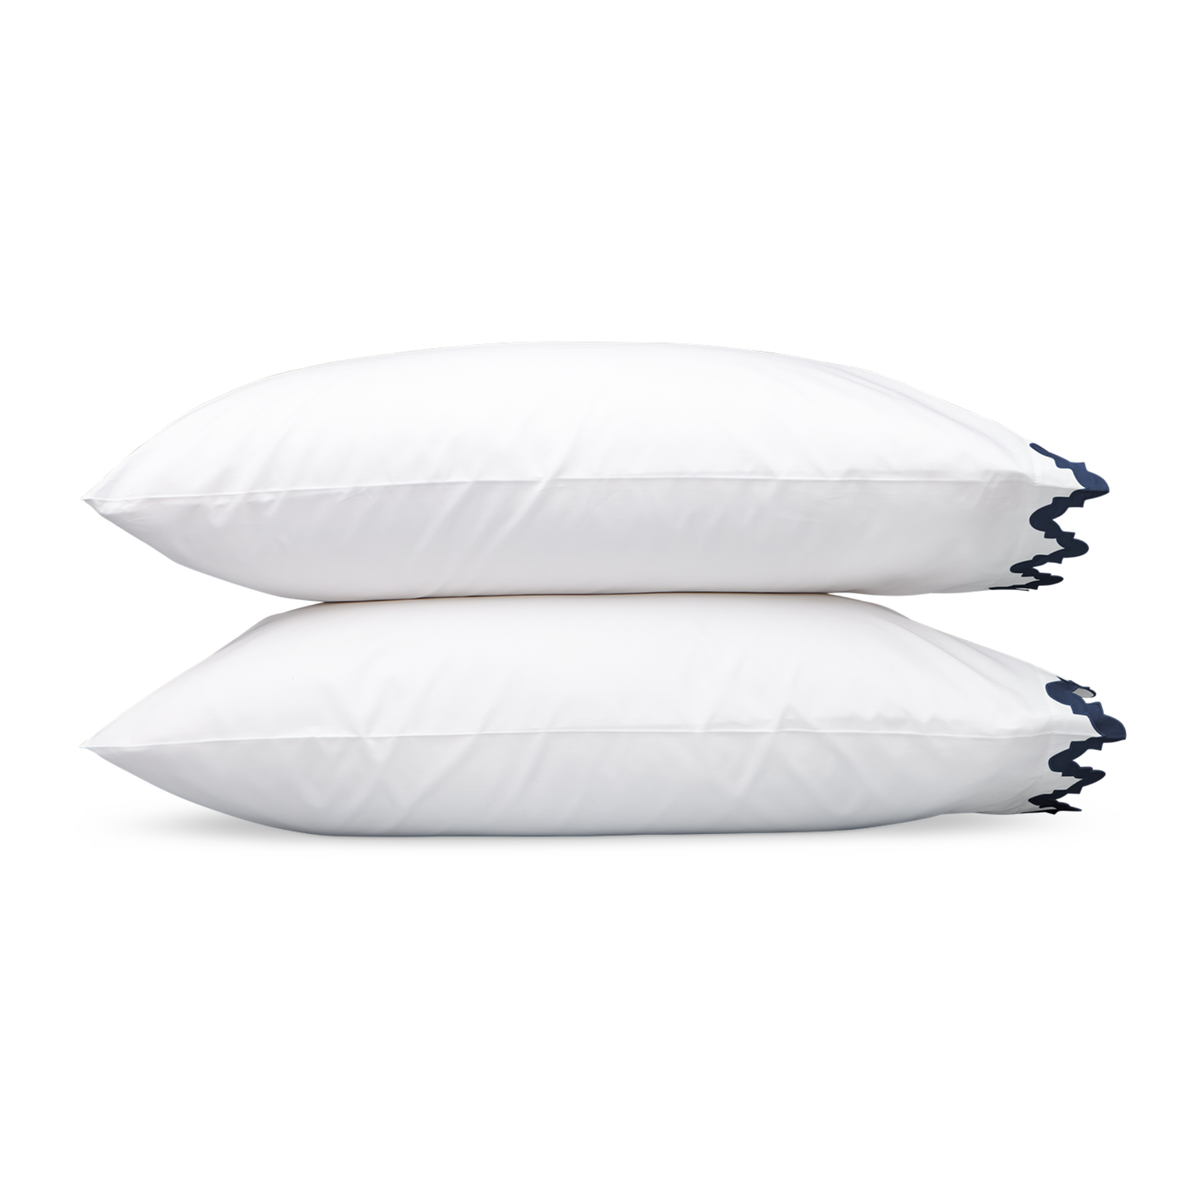 Pair of Pillowcases of Matouk Aziza Bedding in Navy Color